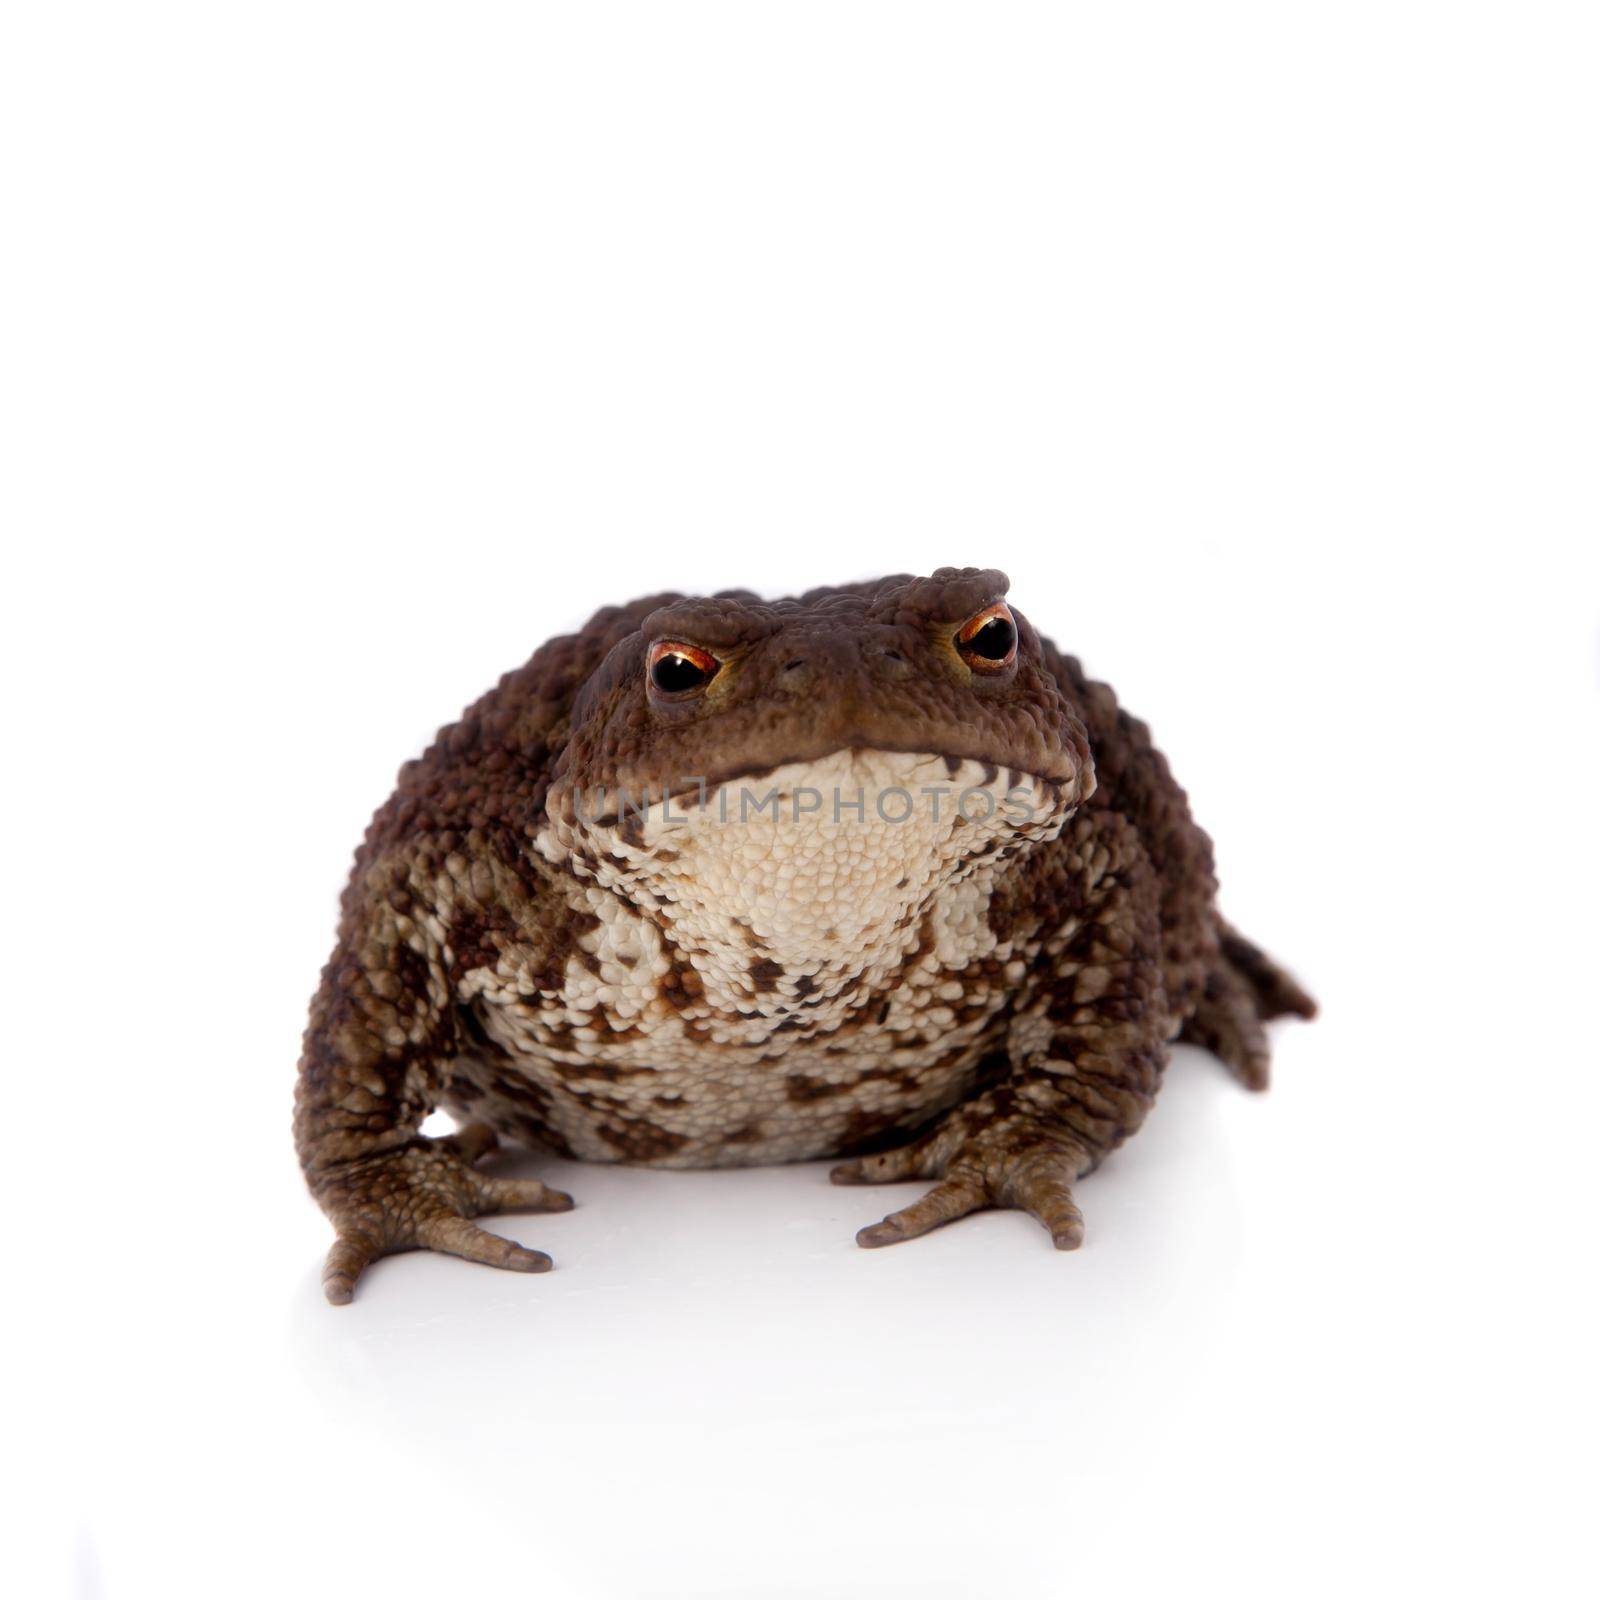 Bufo bufo. Common or European toad on white background